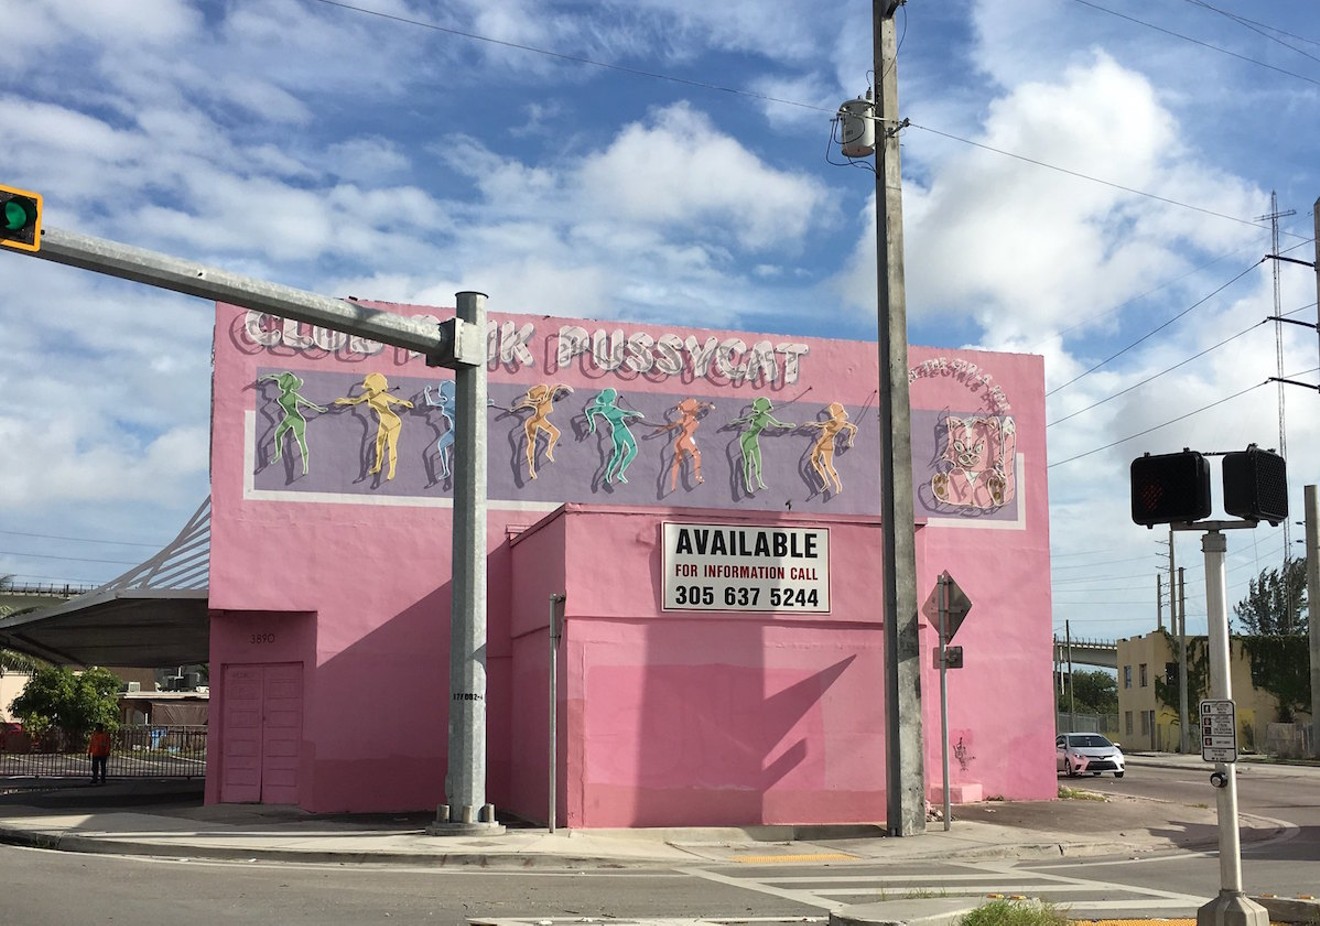 Club Pink Pussycat's facade has been painted over.